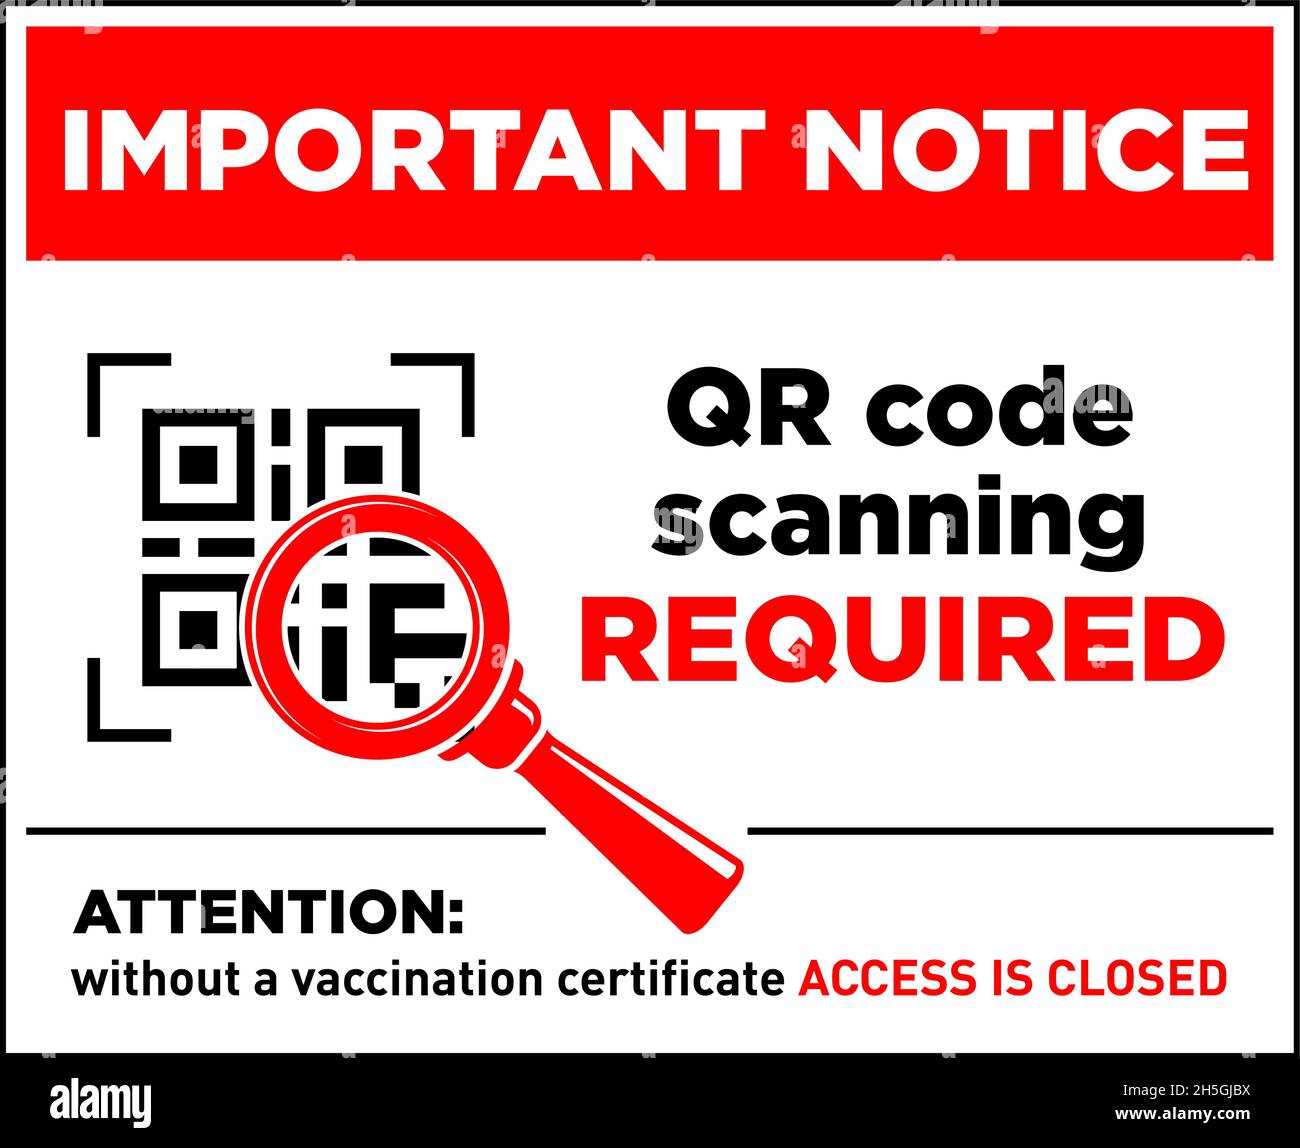 Important notice green pass required with id. QR code scanning required. Announcement before entering a public place during the coronavirus pandemic. Stock Vector